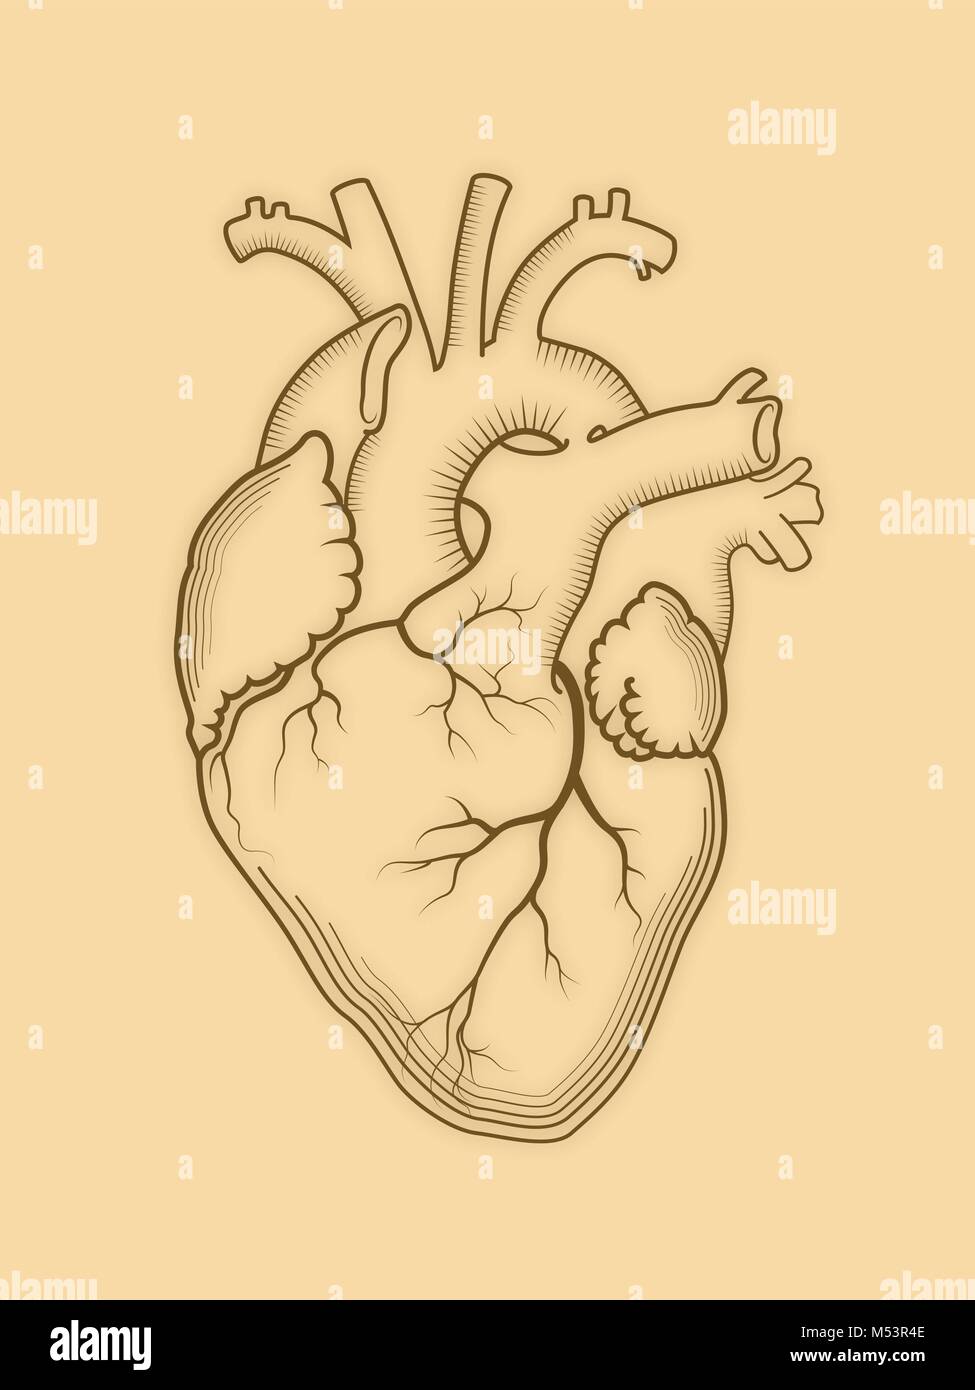 Premium Photo  Ink drawing of structure of internal organ of heart  structure of venous system of human heart organ